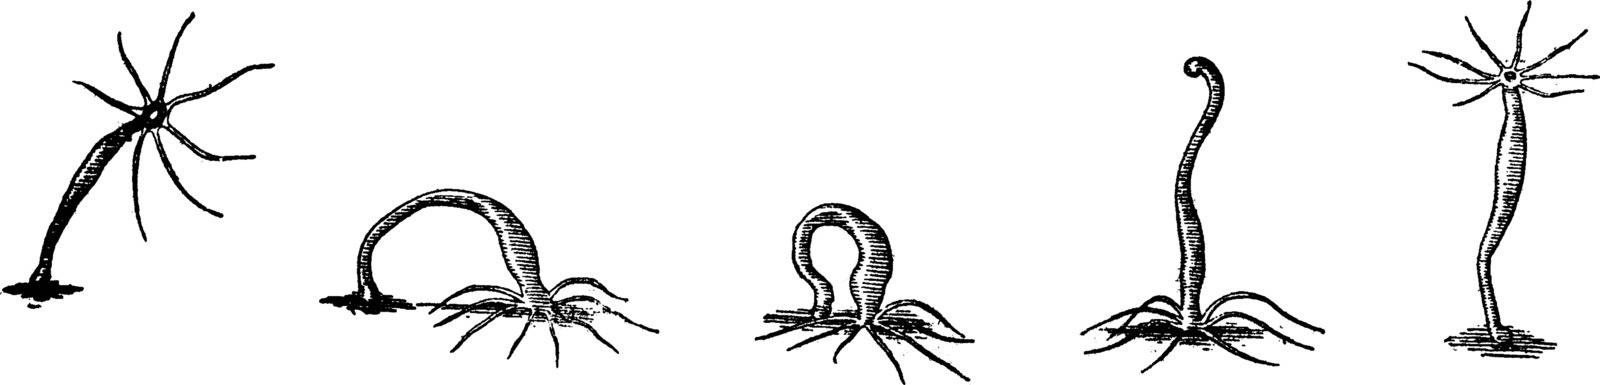 The freshwater hydra and its mode of locomotion, vintage engraved illustration. Earth before man – 1886.